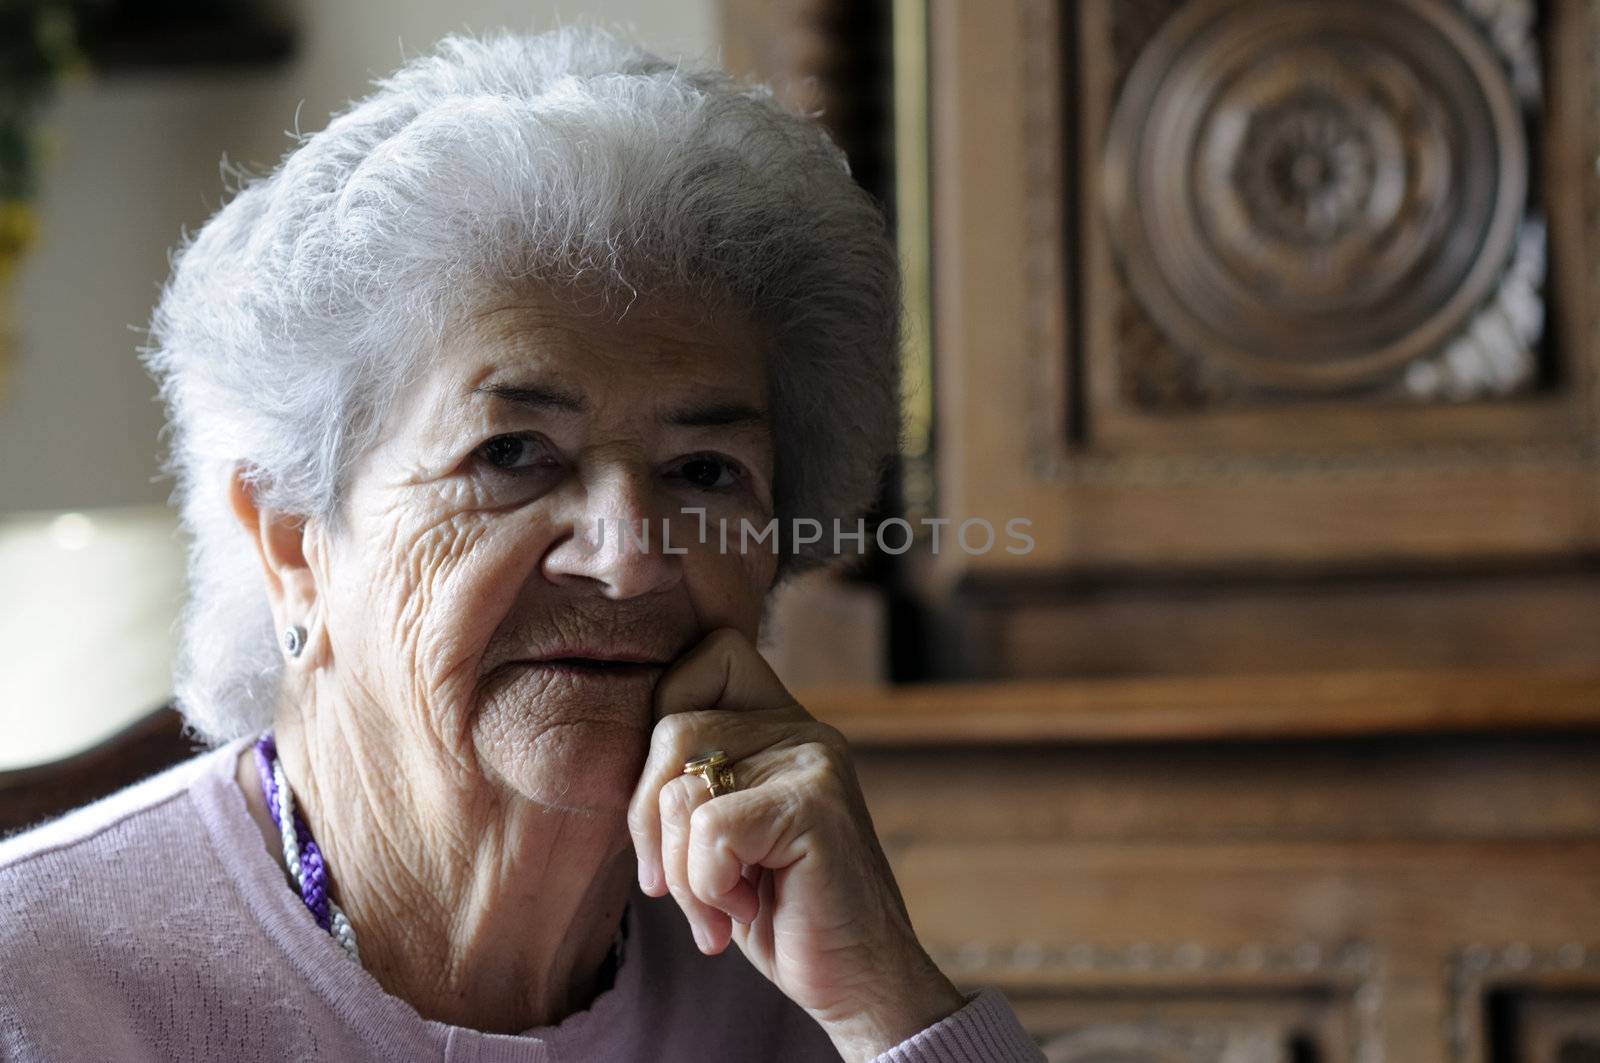 Sad senior woman (83 Years old) thinking about life.